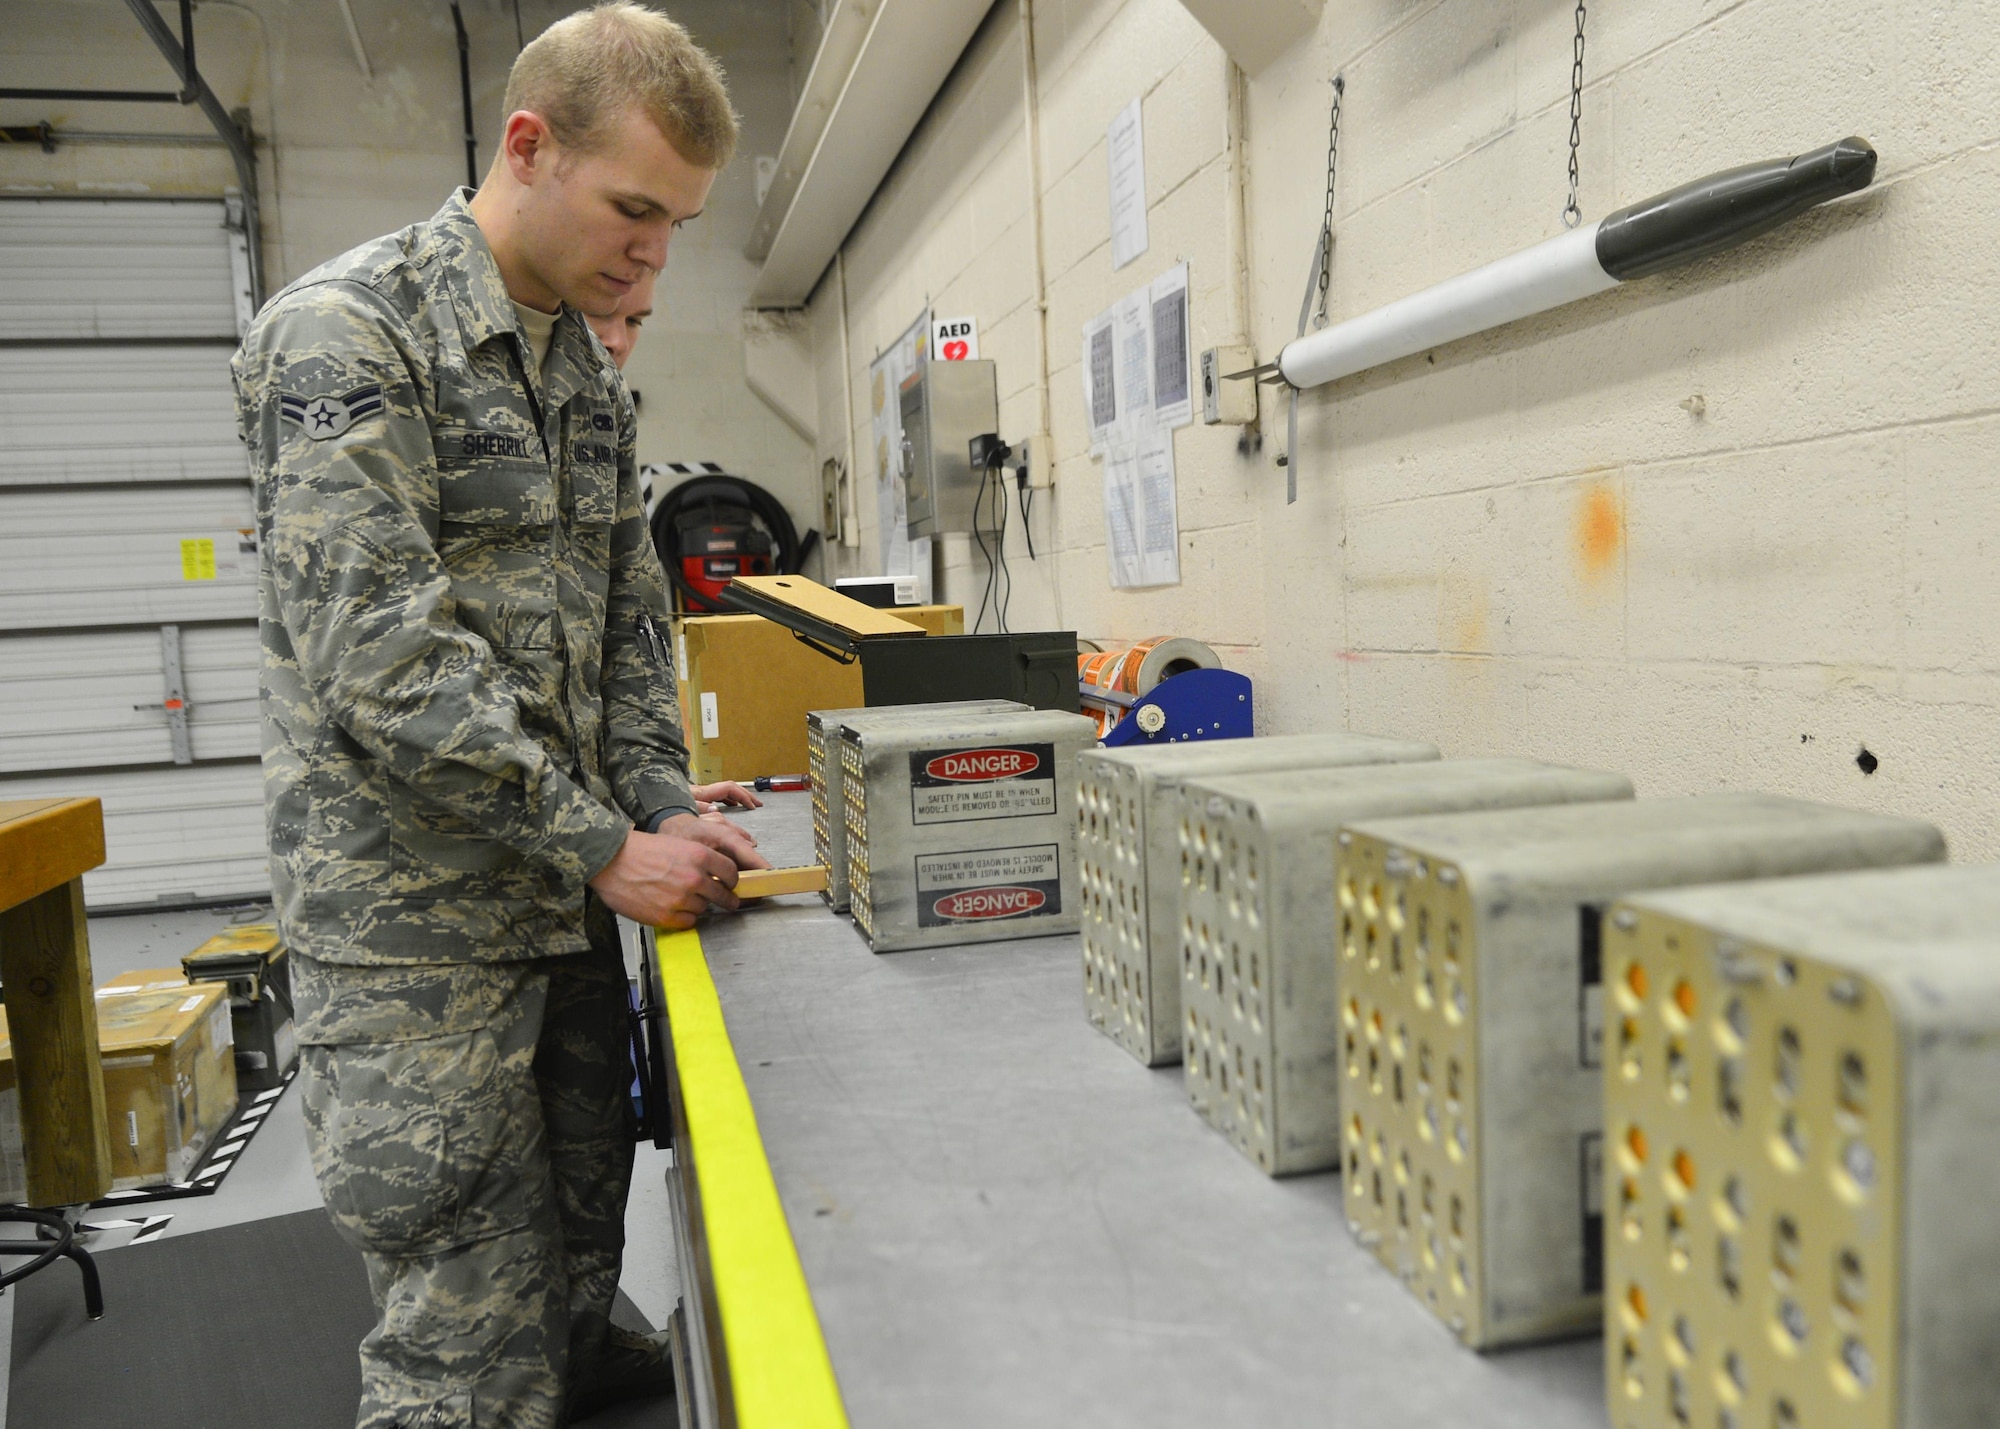 Airman 1st Class Clay Sherrill, a 436th Maintenance Squadron munitions storage crewmember, loads a flare stick into a magazine box March 28, 2016, at Dover Air Force Base, Del. Once the magazine boxes are fully loaded, they are transported to the flightline to be uploaded onto the aircraft. (U.S. Air Force photo/Senior Airman William Johnson)